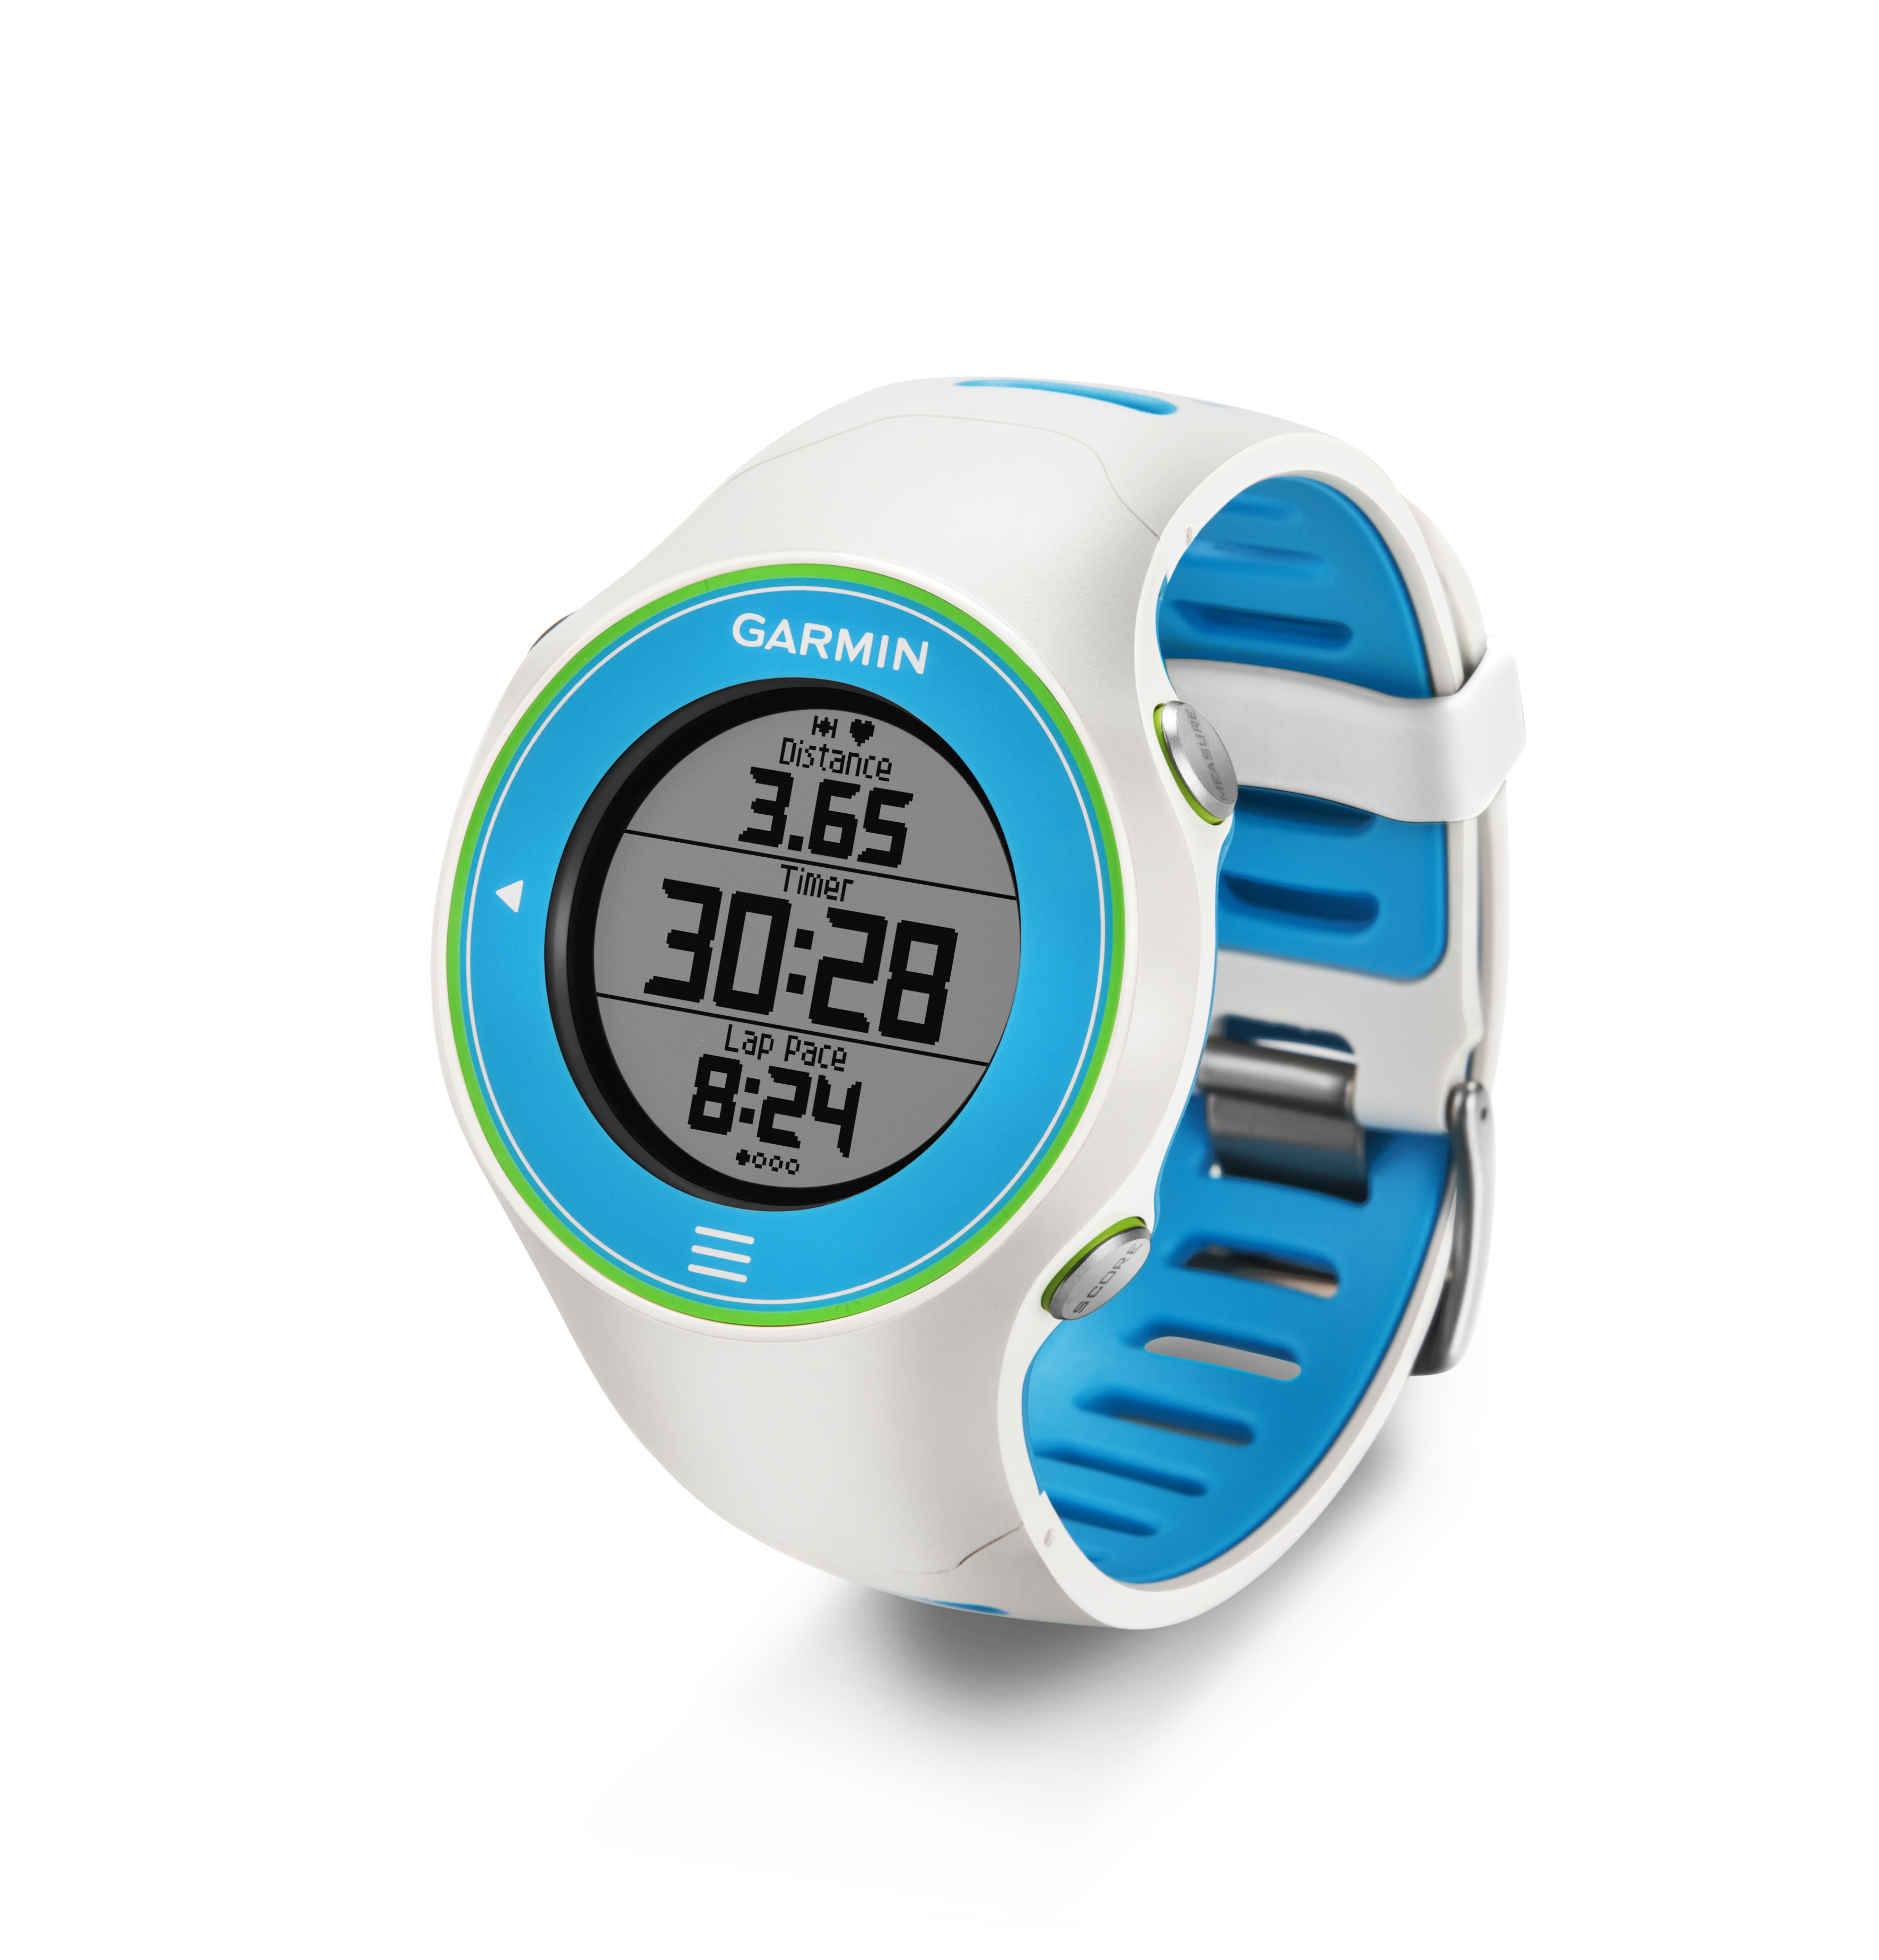 Stand out from the pack Garmin Edition Forerunner 210 & 610 - Blog